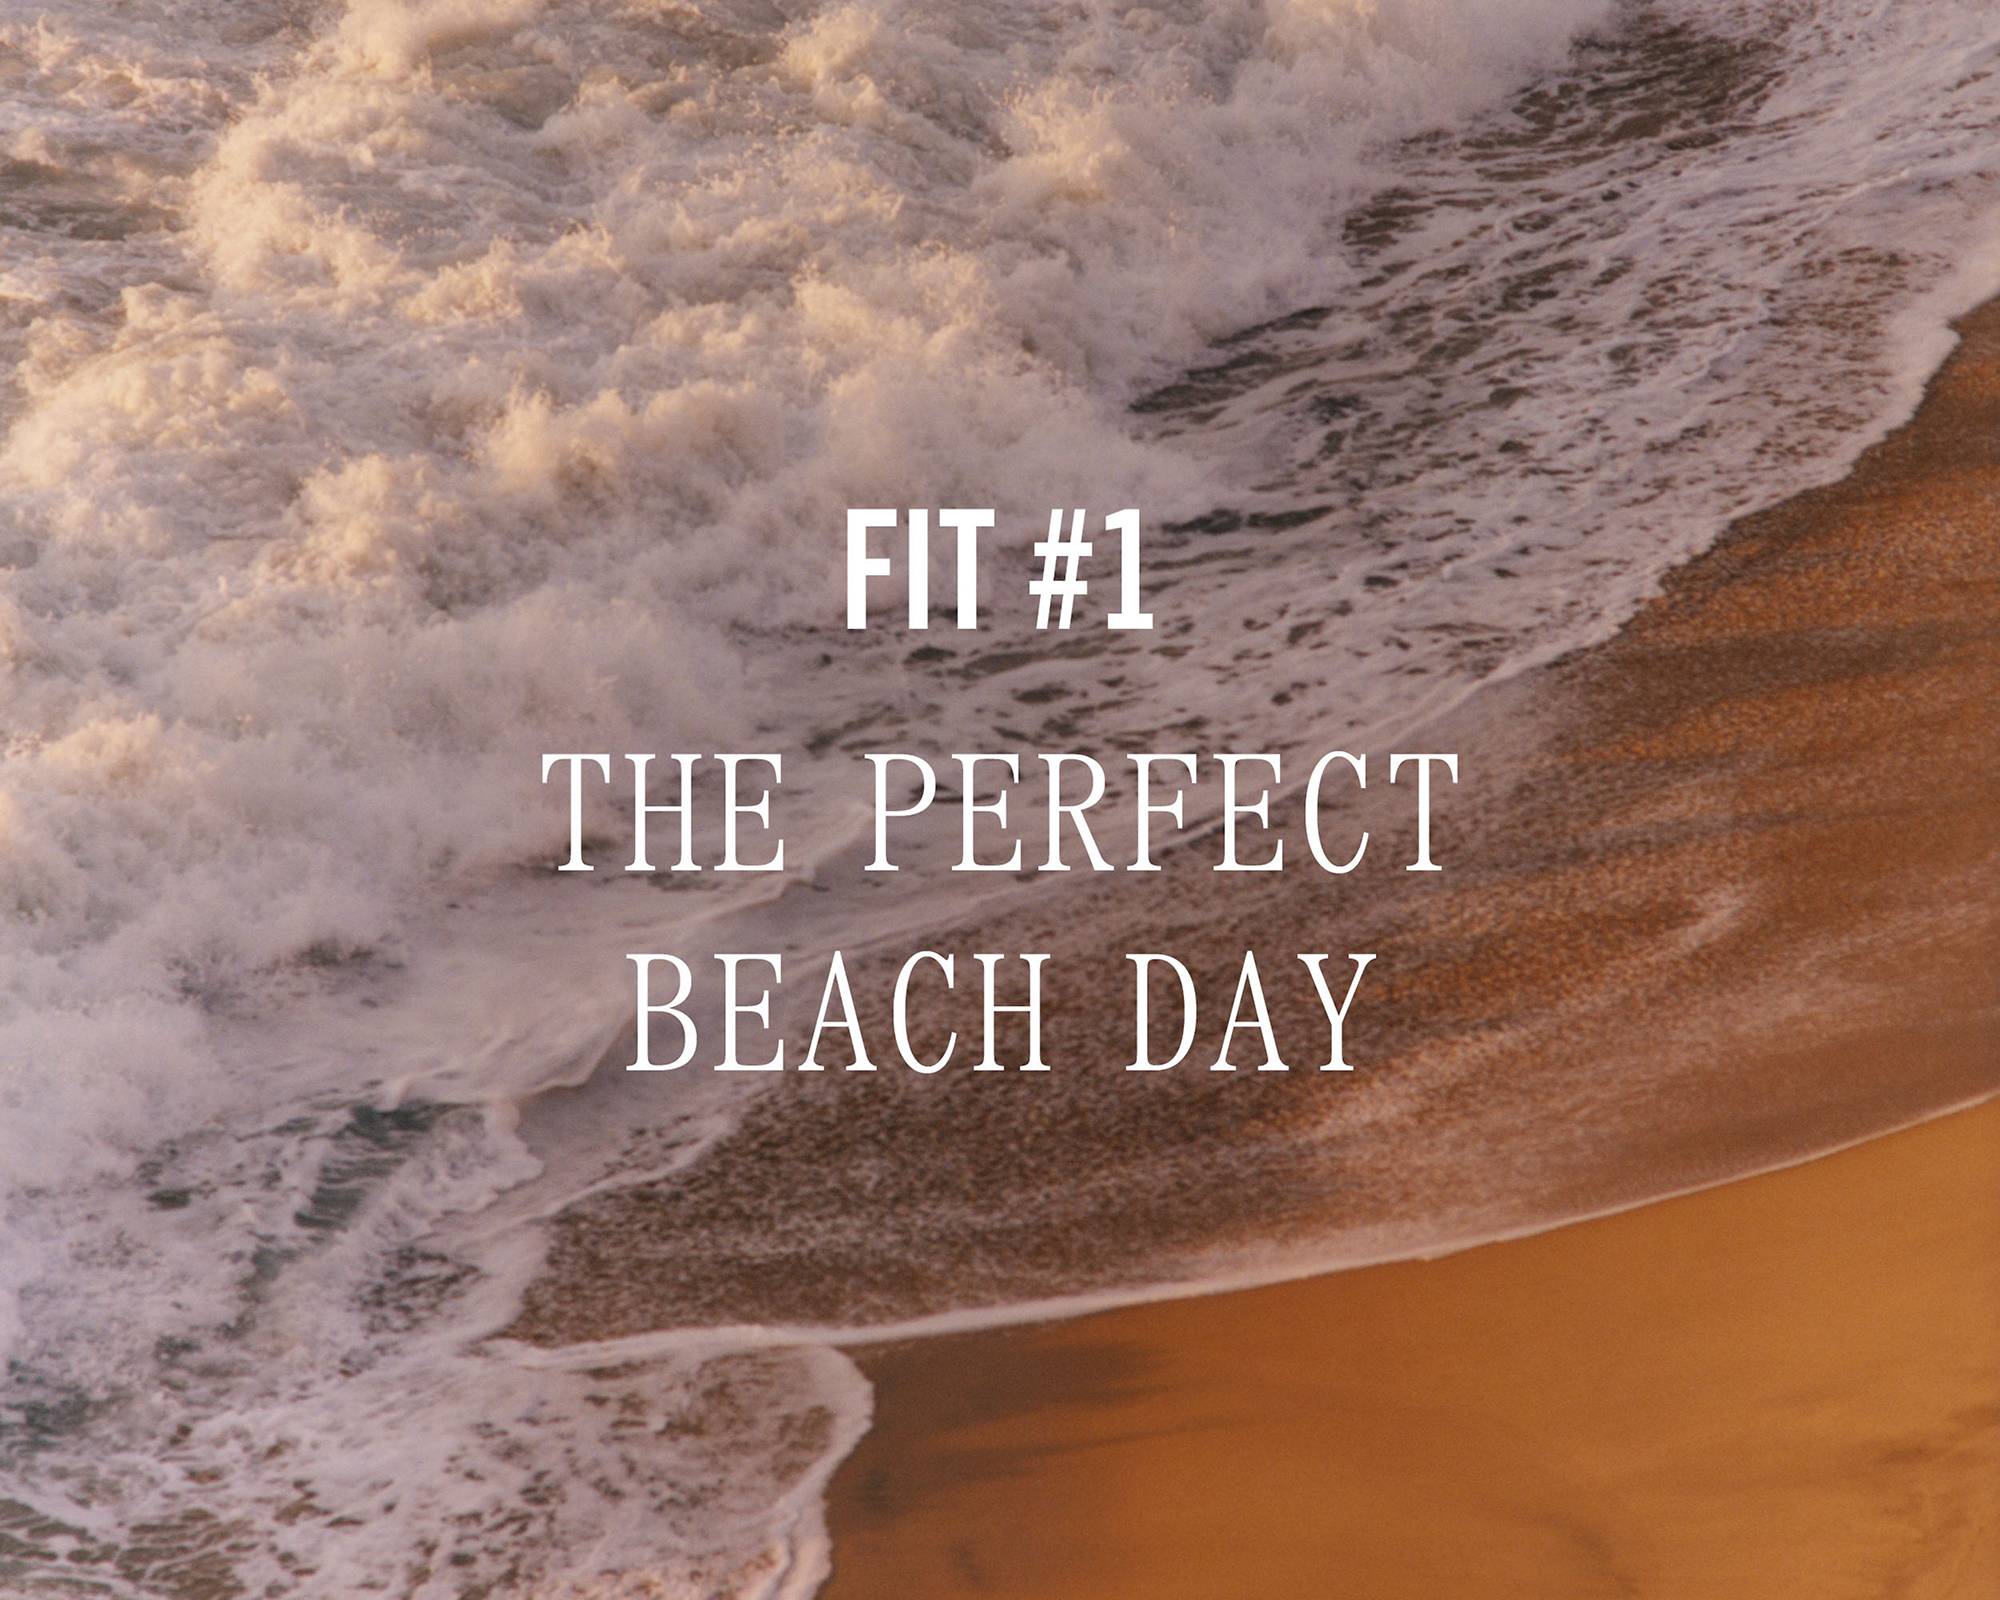 Image of a beach with overlaid text "Fit #1 THE PERFECT BEACH DAY"